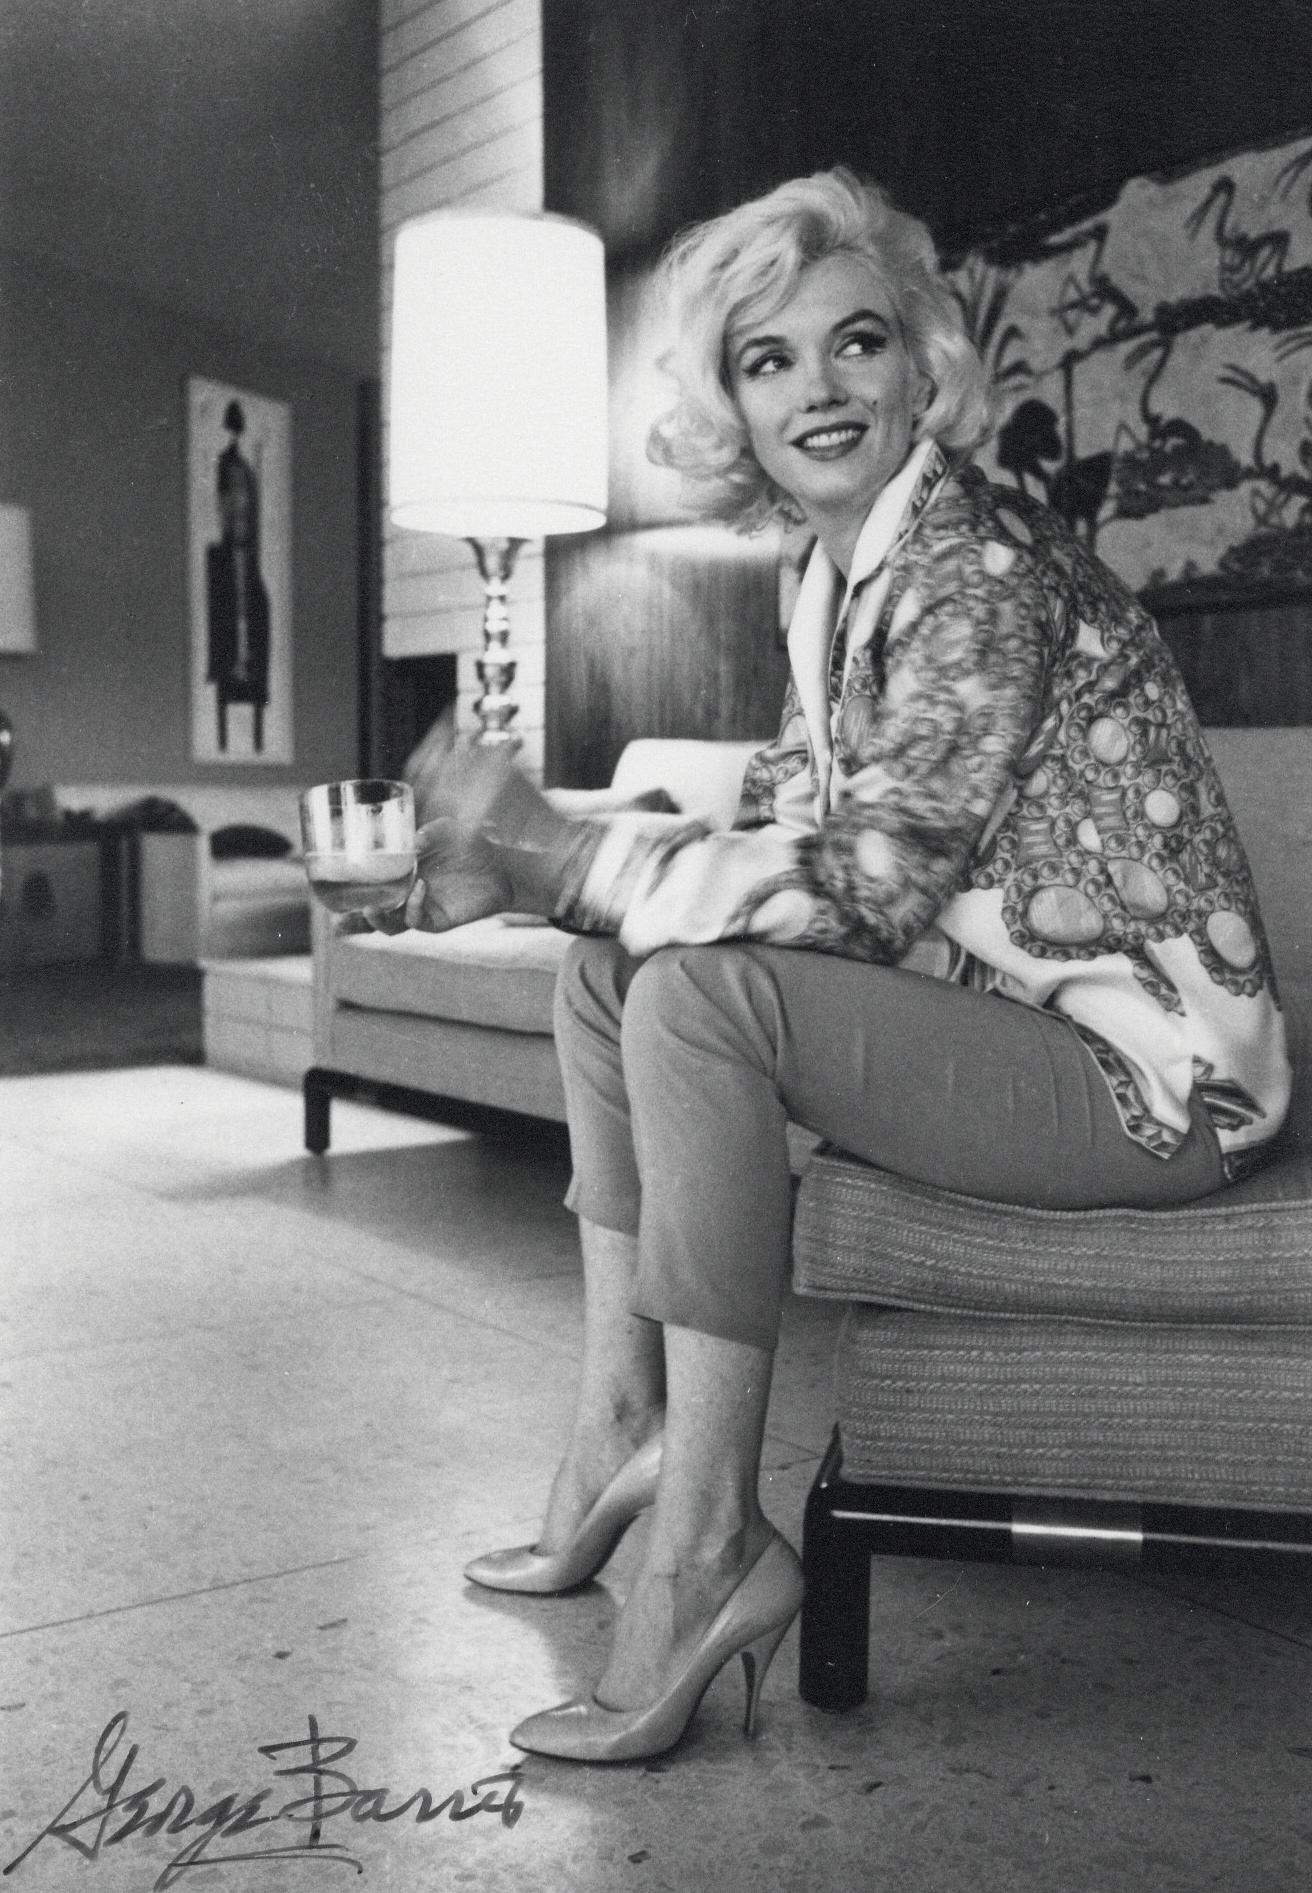 George Barris Black and White Photograph - Marilyn Monroe in Pucci Jacket on Couch Vintage Original Photograph